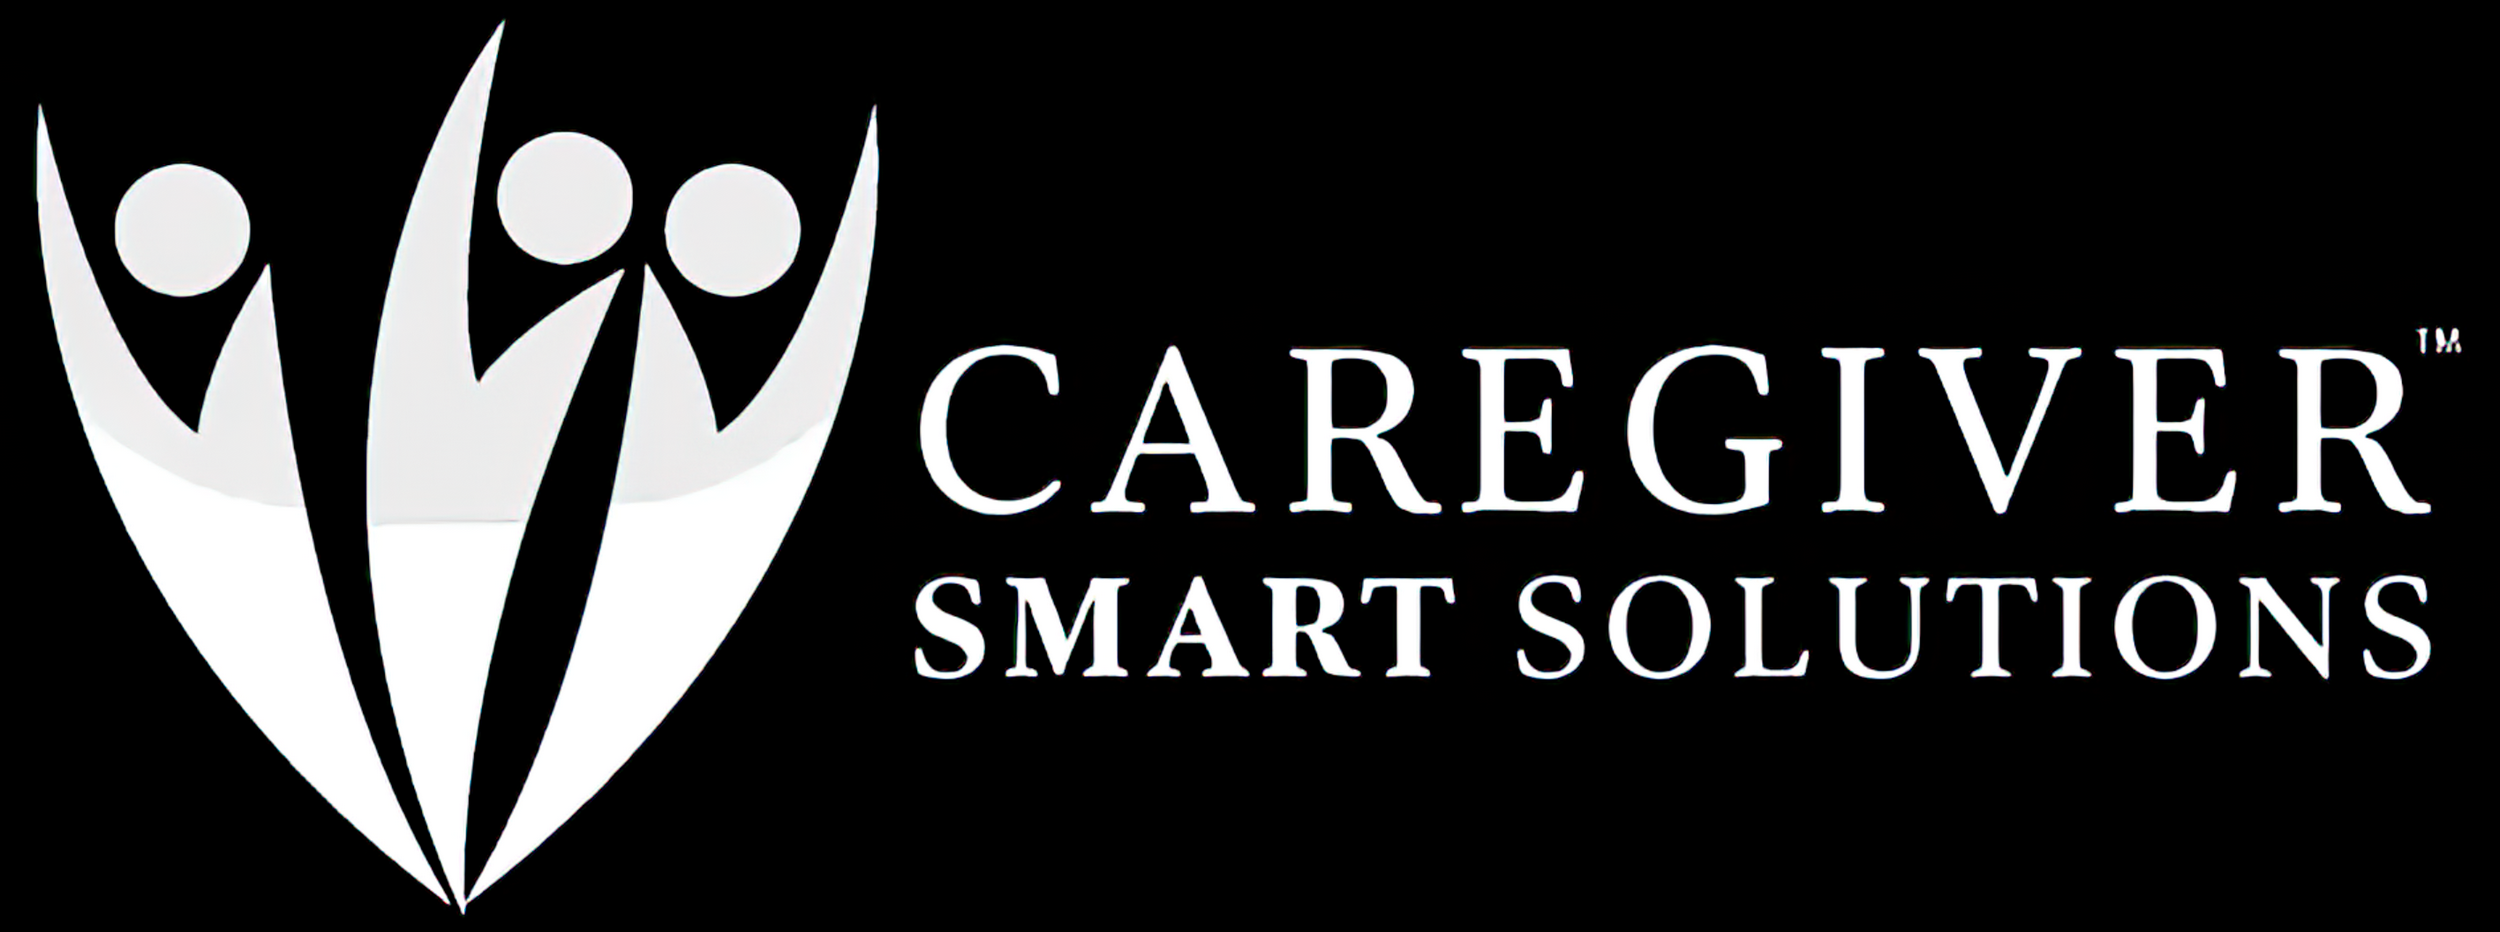 Black and white logo for Caregivers Smart Solutions